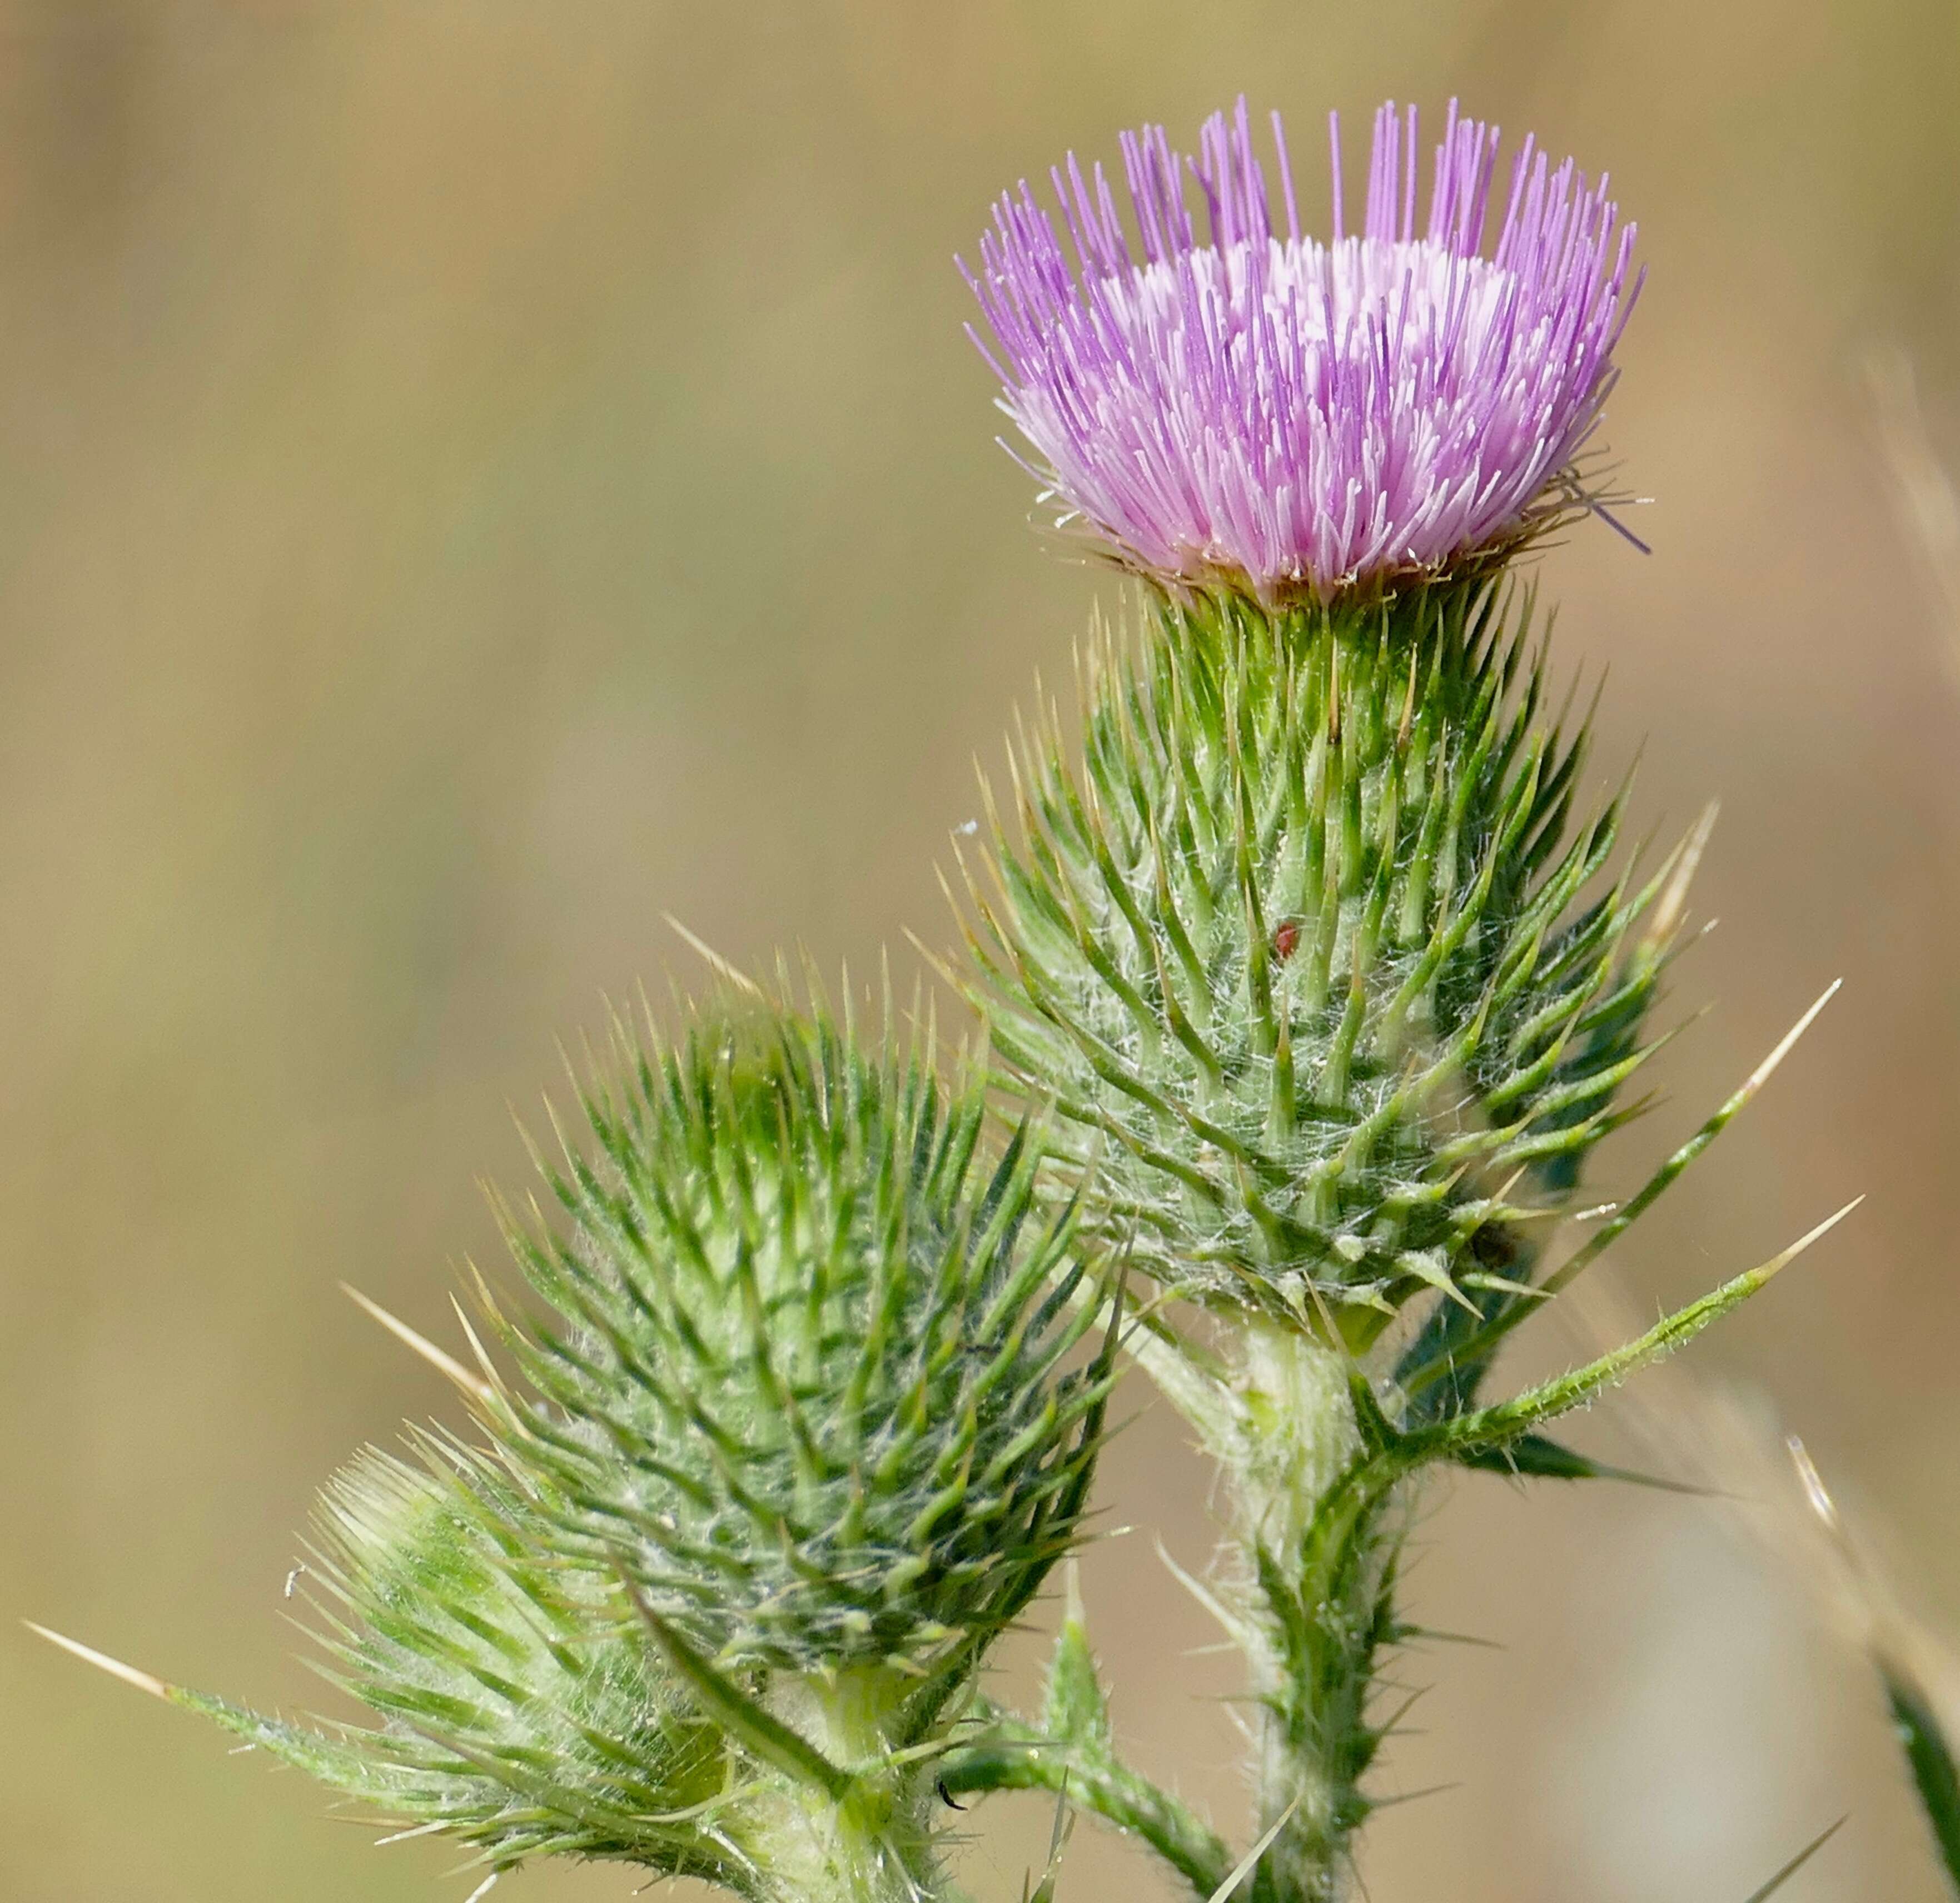 Image of thistle